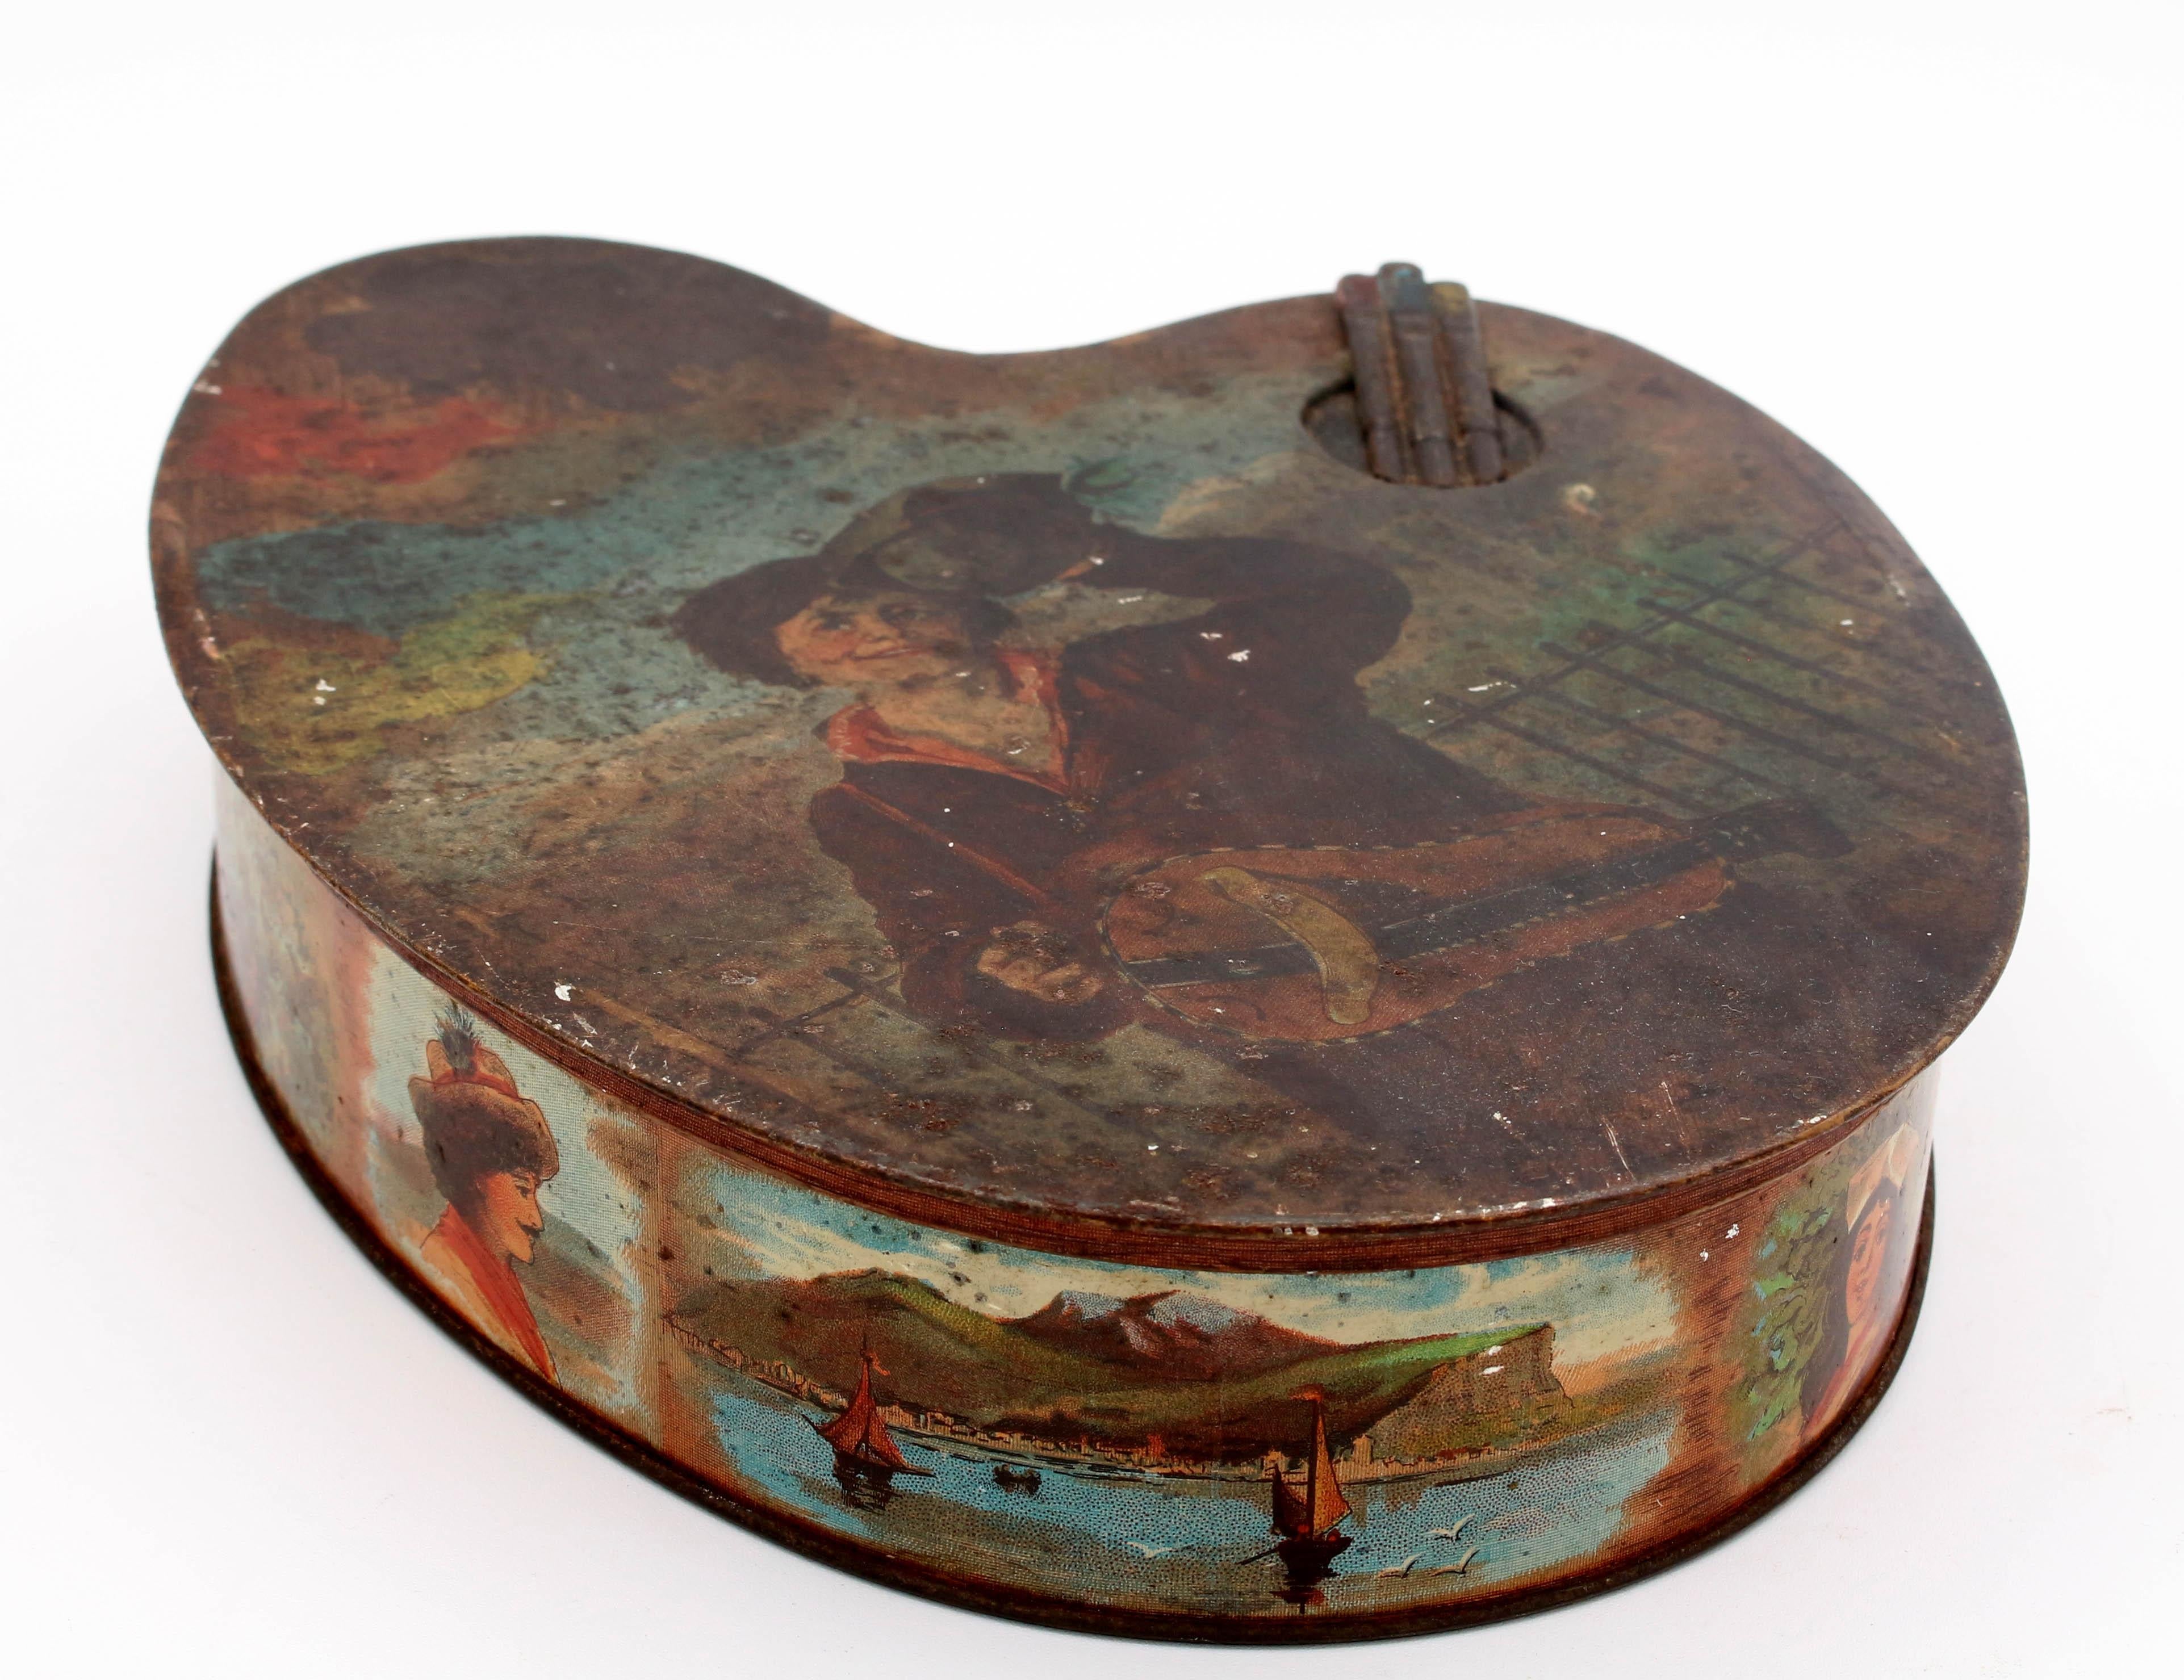 A wonderful & very rare Huntley & Palmer's Biscuit Tin in the form of an Artist's Pallette. We have never seen this example in England and, in fact, discovered it in the South of France.